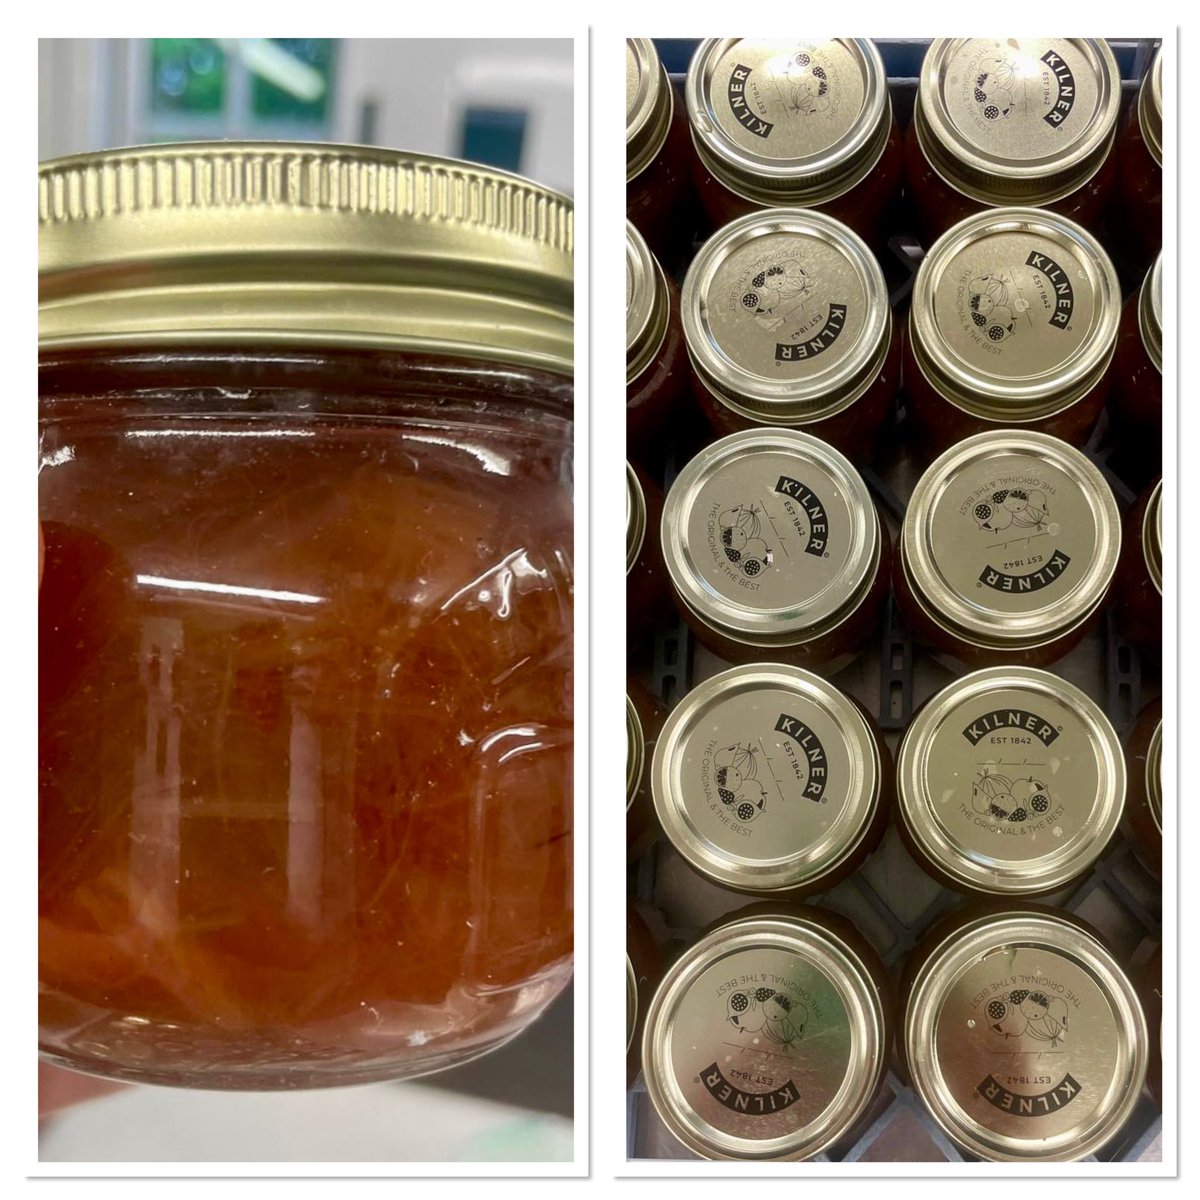 Homemade rhubarb jam by Chef Leon. The rhubarb has been foraged from our grounds. 

#foragedfood #eatnatural #schoolresidential #lovegorsefield